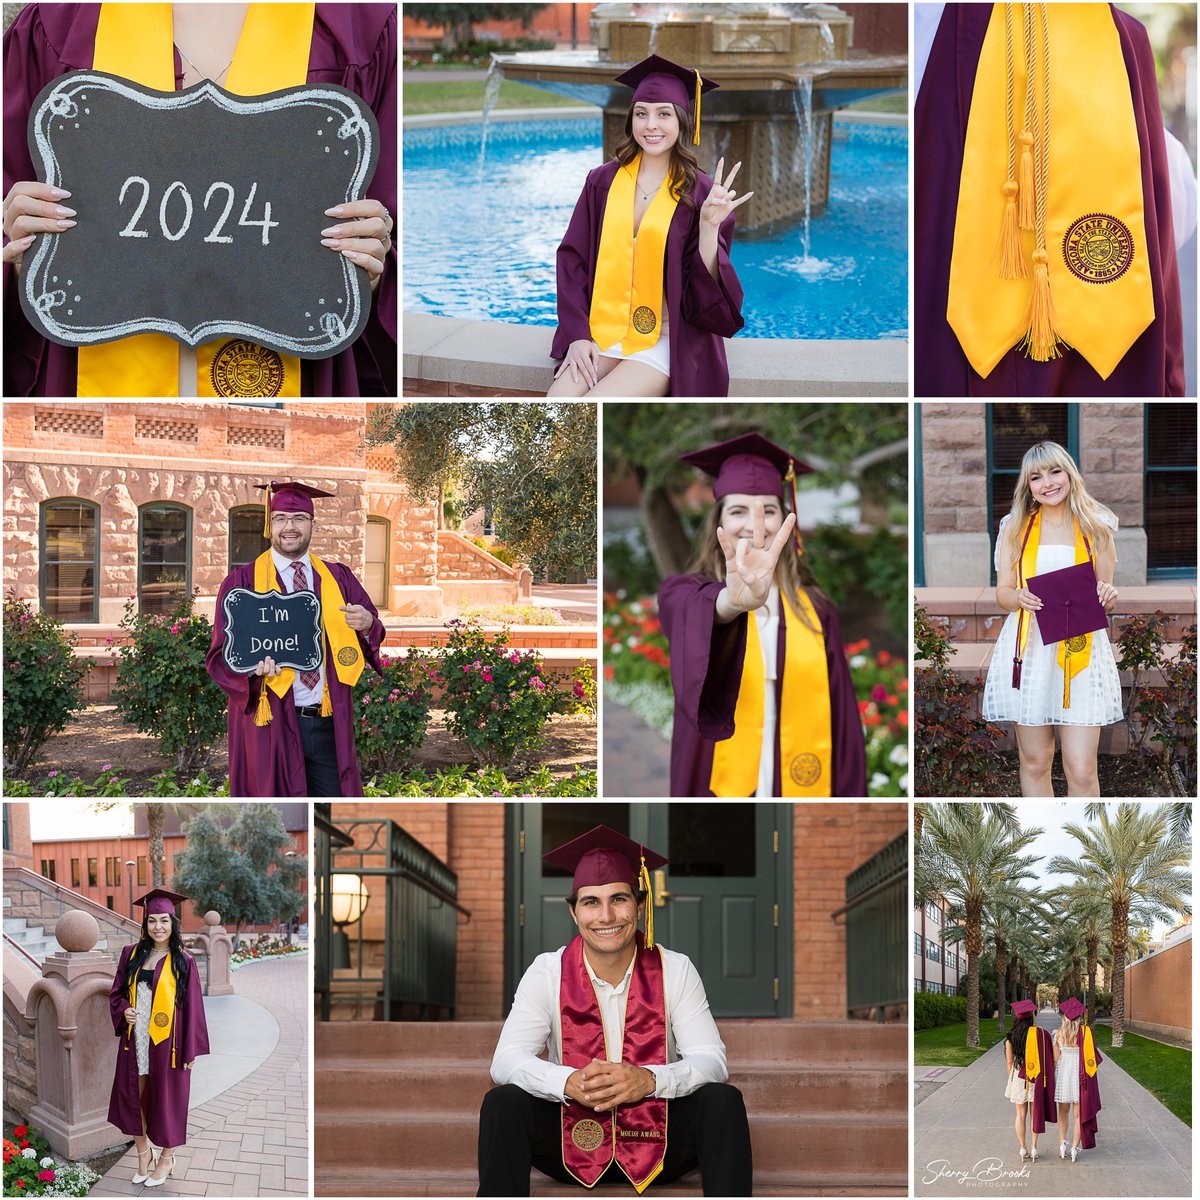 And...that's a wrap on #asugrad season for the spring. December grads - you're up next! #classof2024 #seniorphotographer #capandgown #seniorphotos #asuphotographer #azphotographer #chandlerphotographer #forksup #graduation